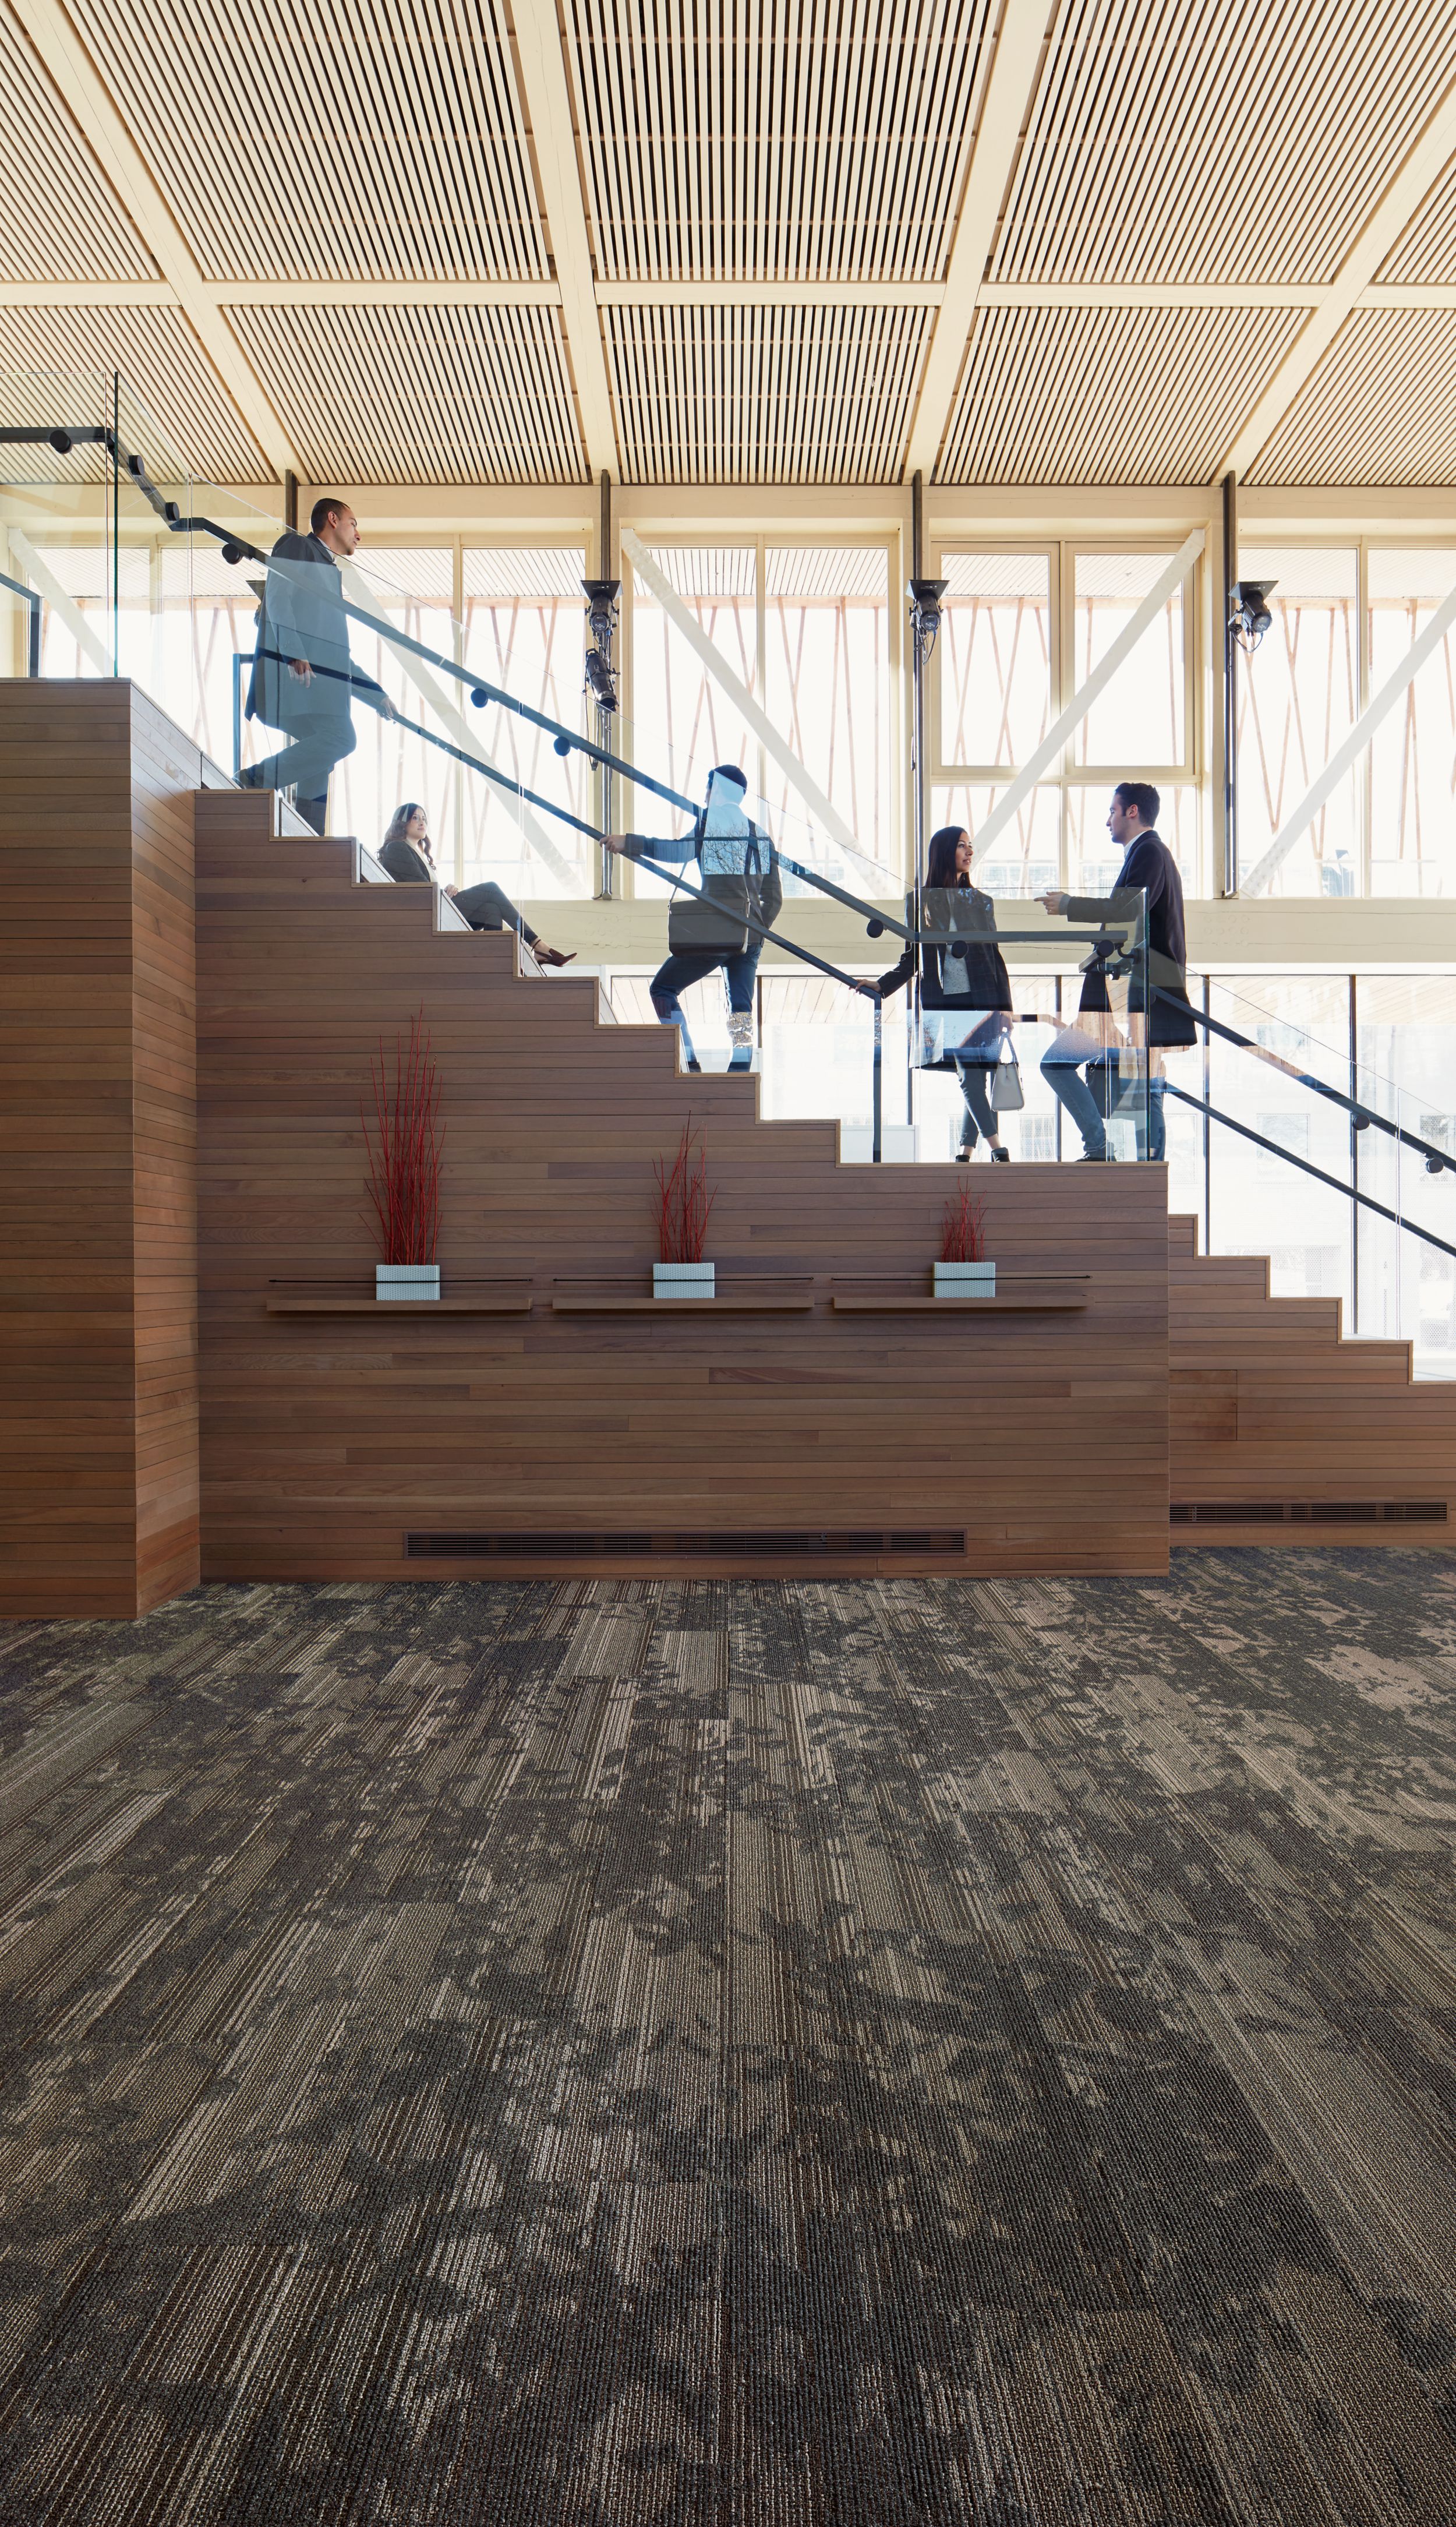 Interface Glazing plank carpet tile with wooden staircase in background numéro d’image 1